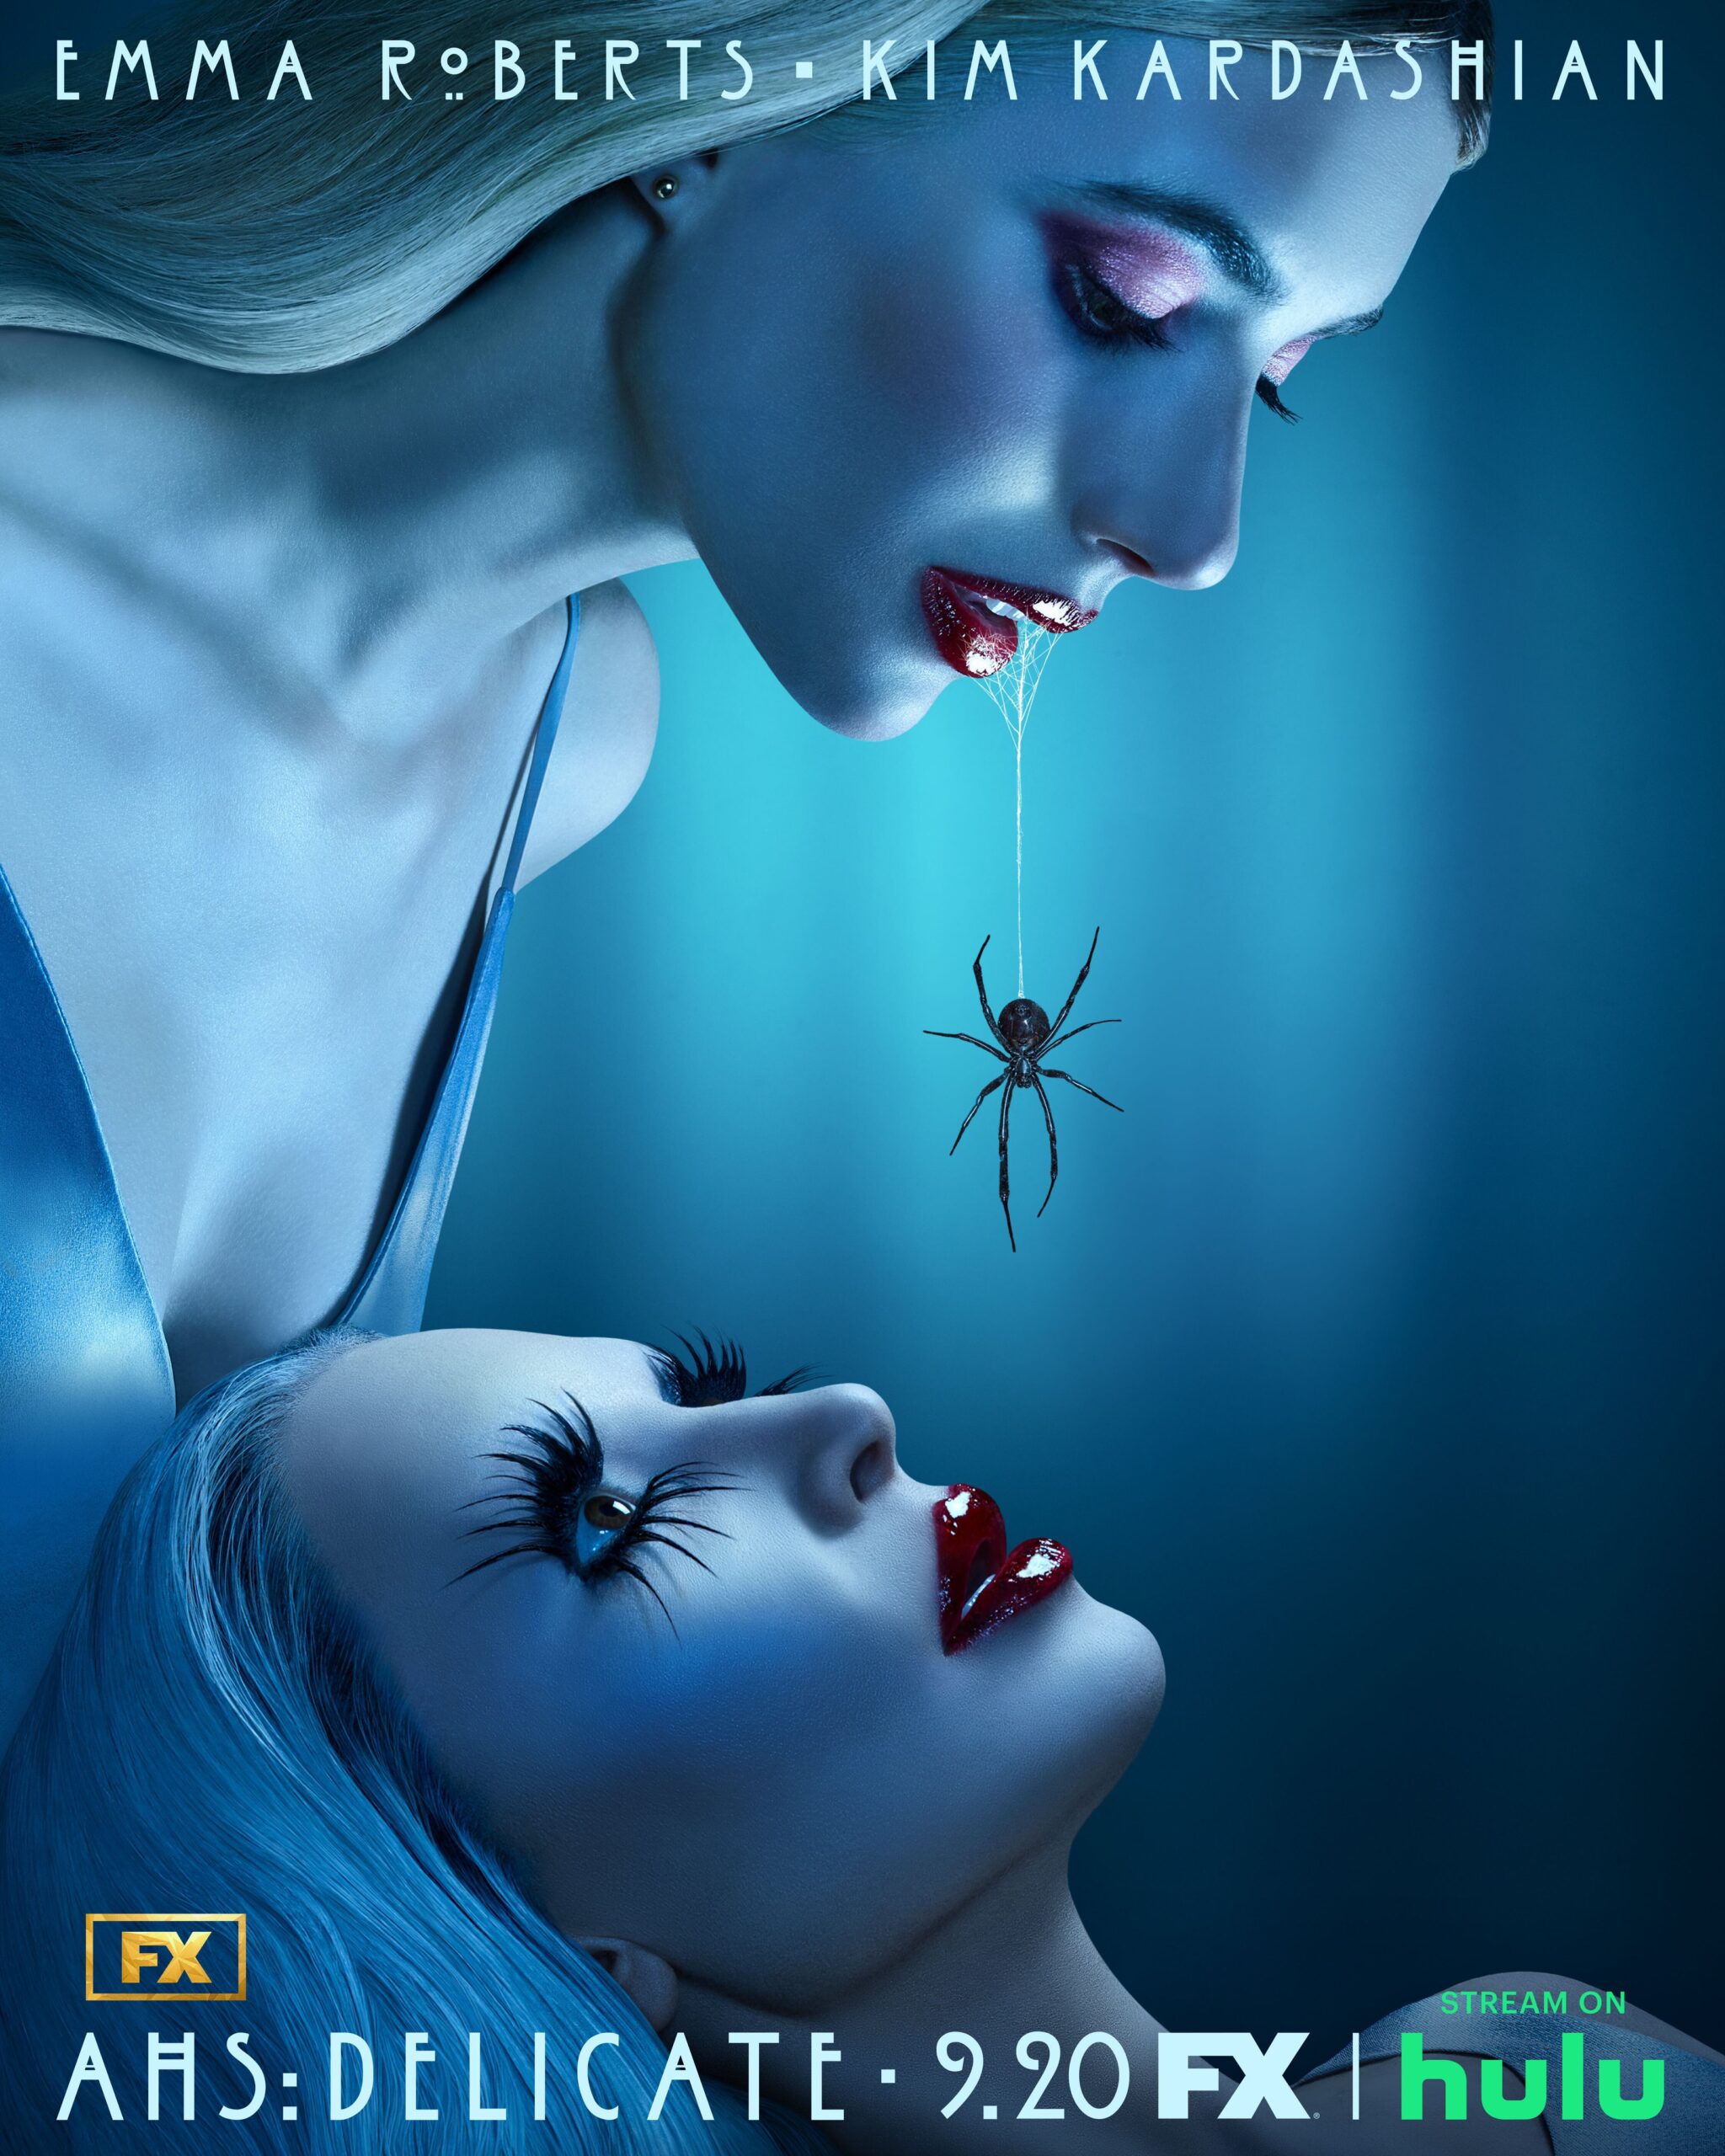 Emma Roberts & Kim K Play with a Spider in American Horror Story S12 Poster